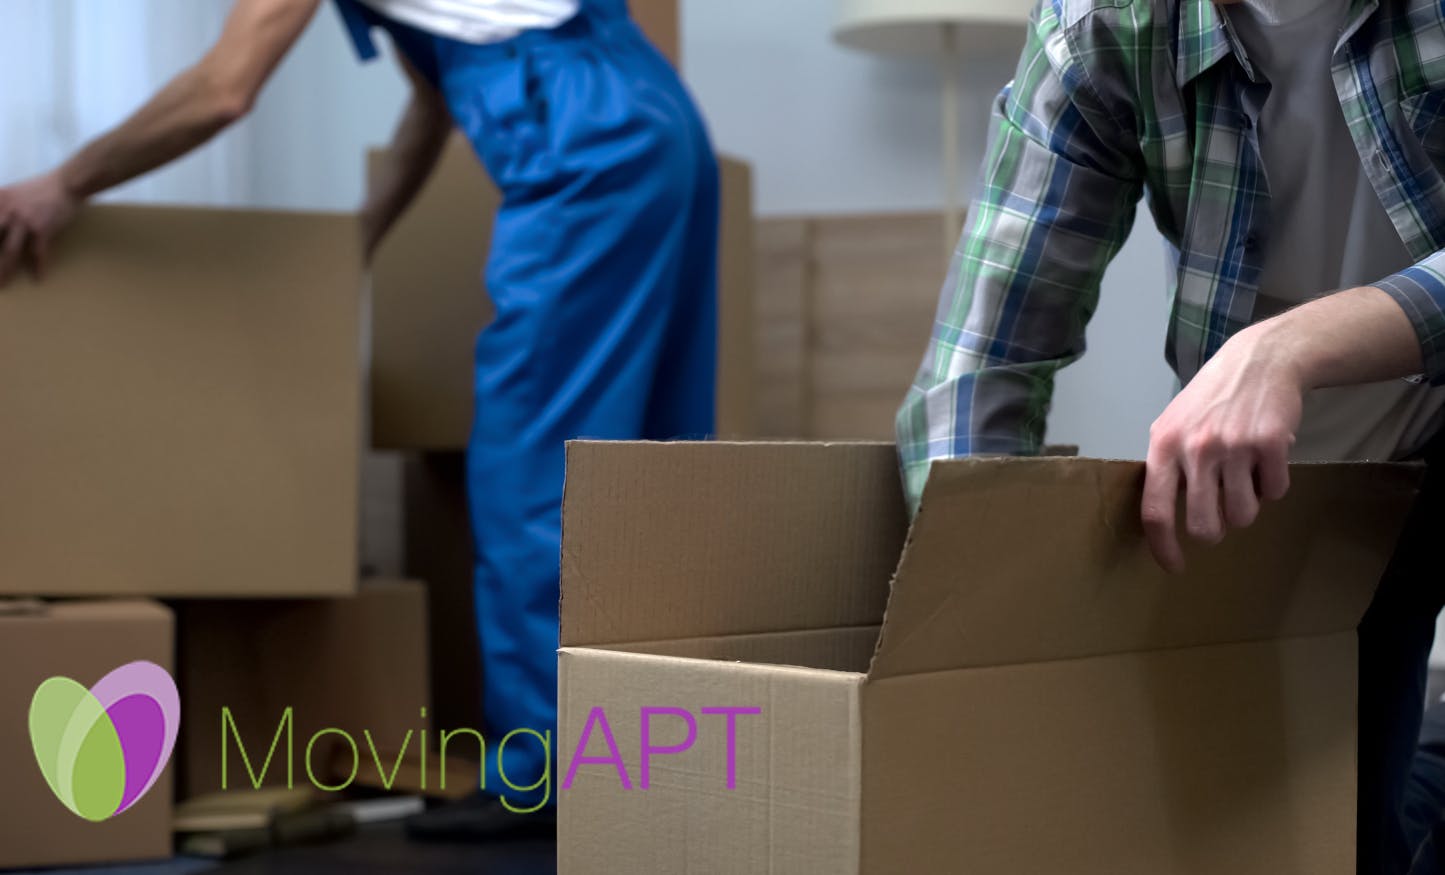 Moving APT: Moving Broker Services Review